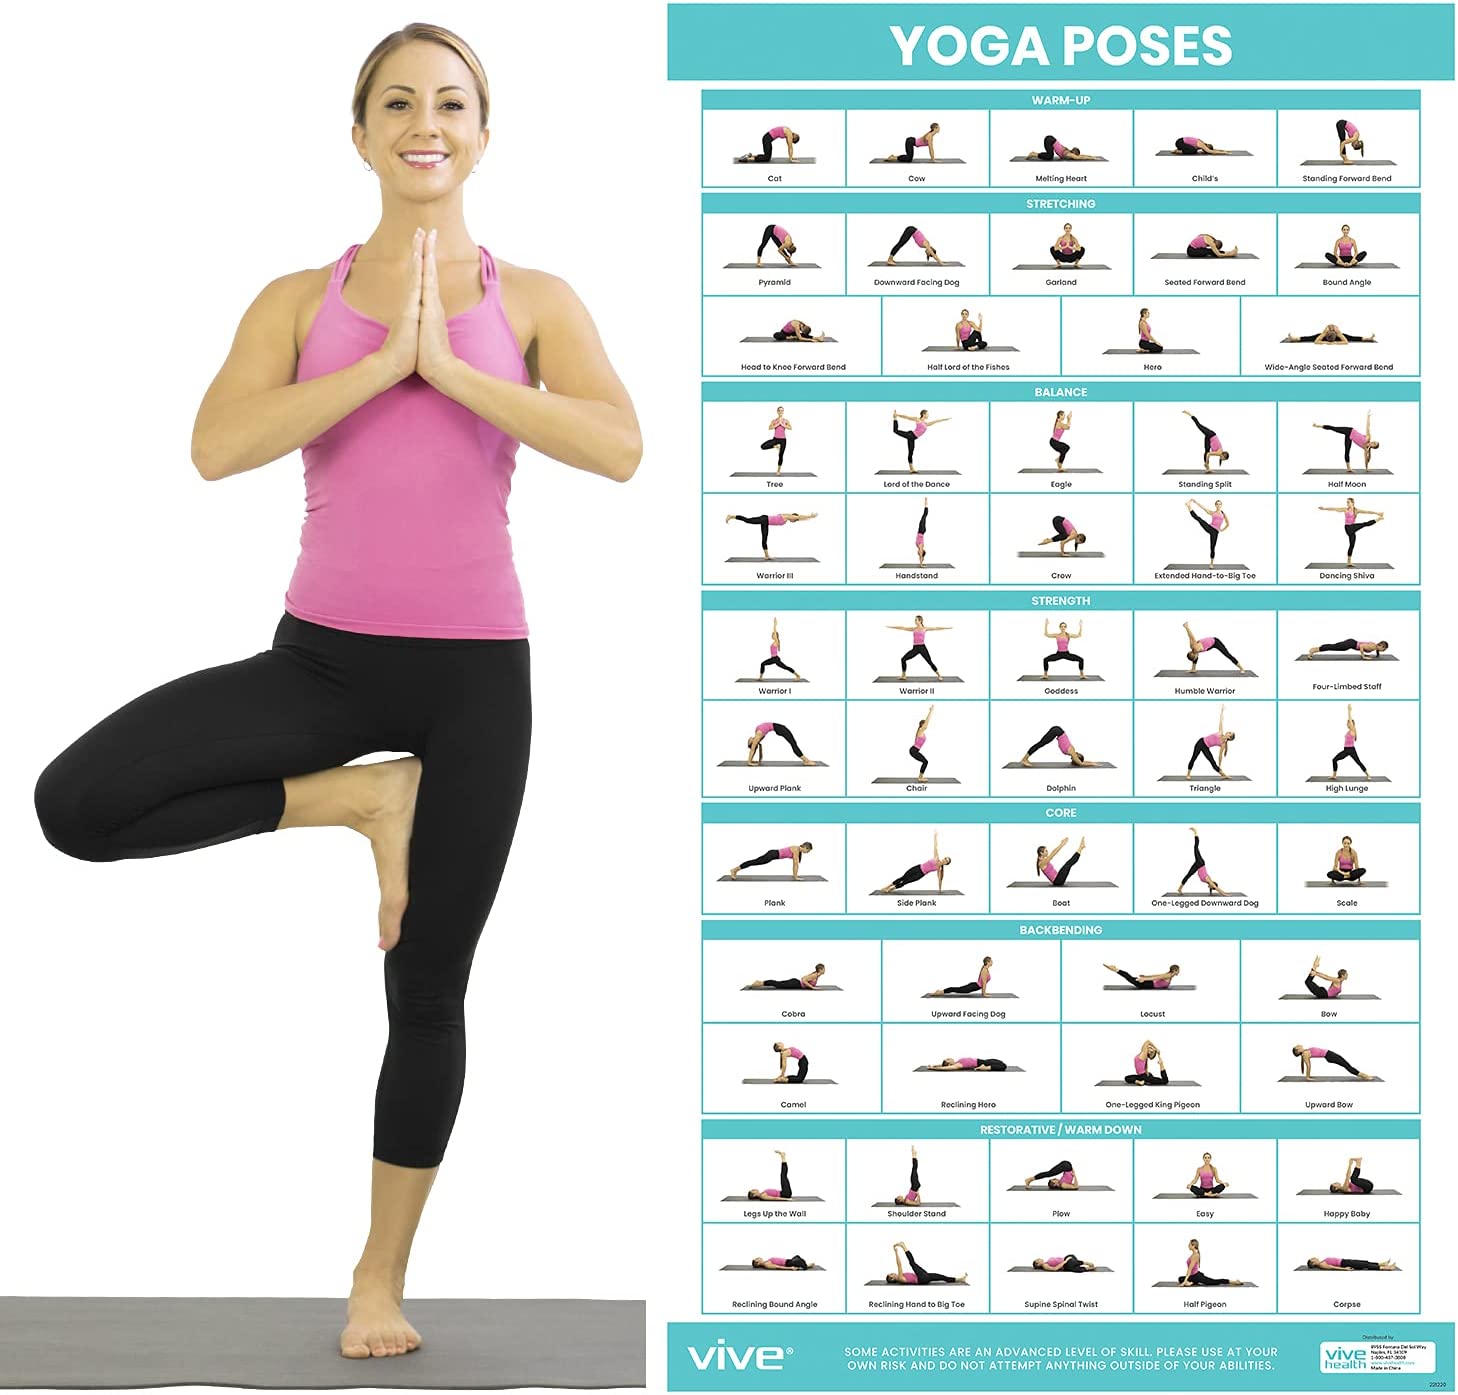 Yoga Poses to Reduce Anxiety
